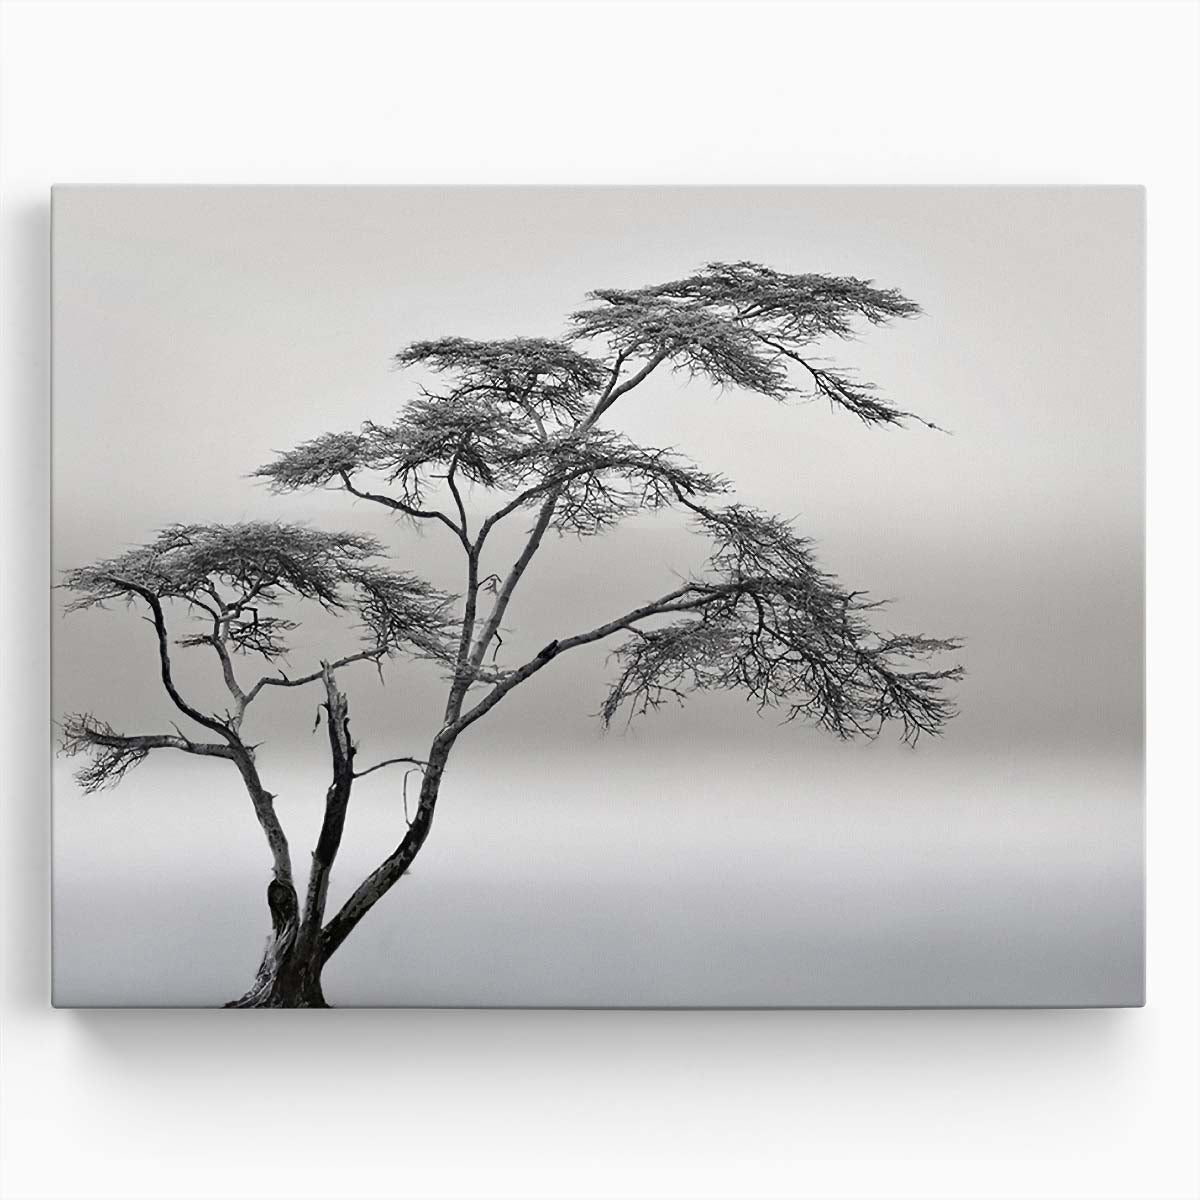 Misty Savannah Lonely Tree Monochrome Landscape Wall Art by Luxuriance Designs. Made in USA.